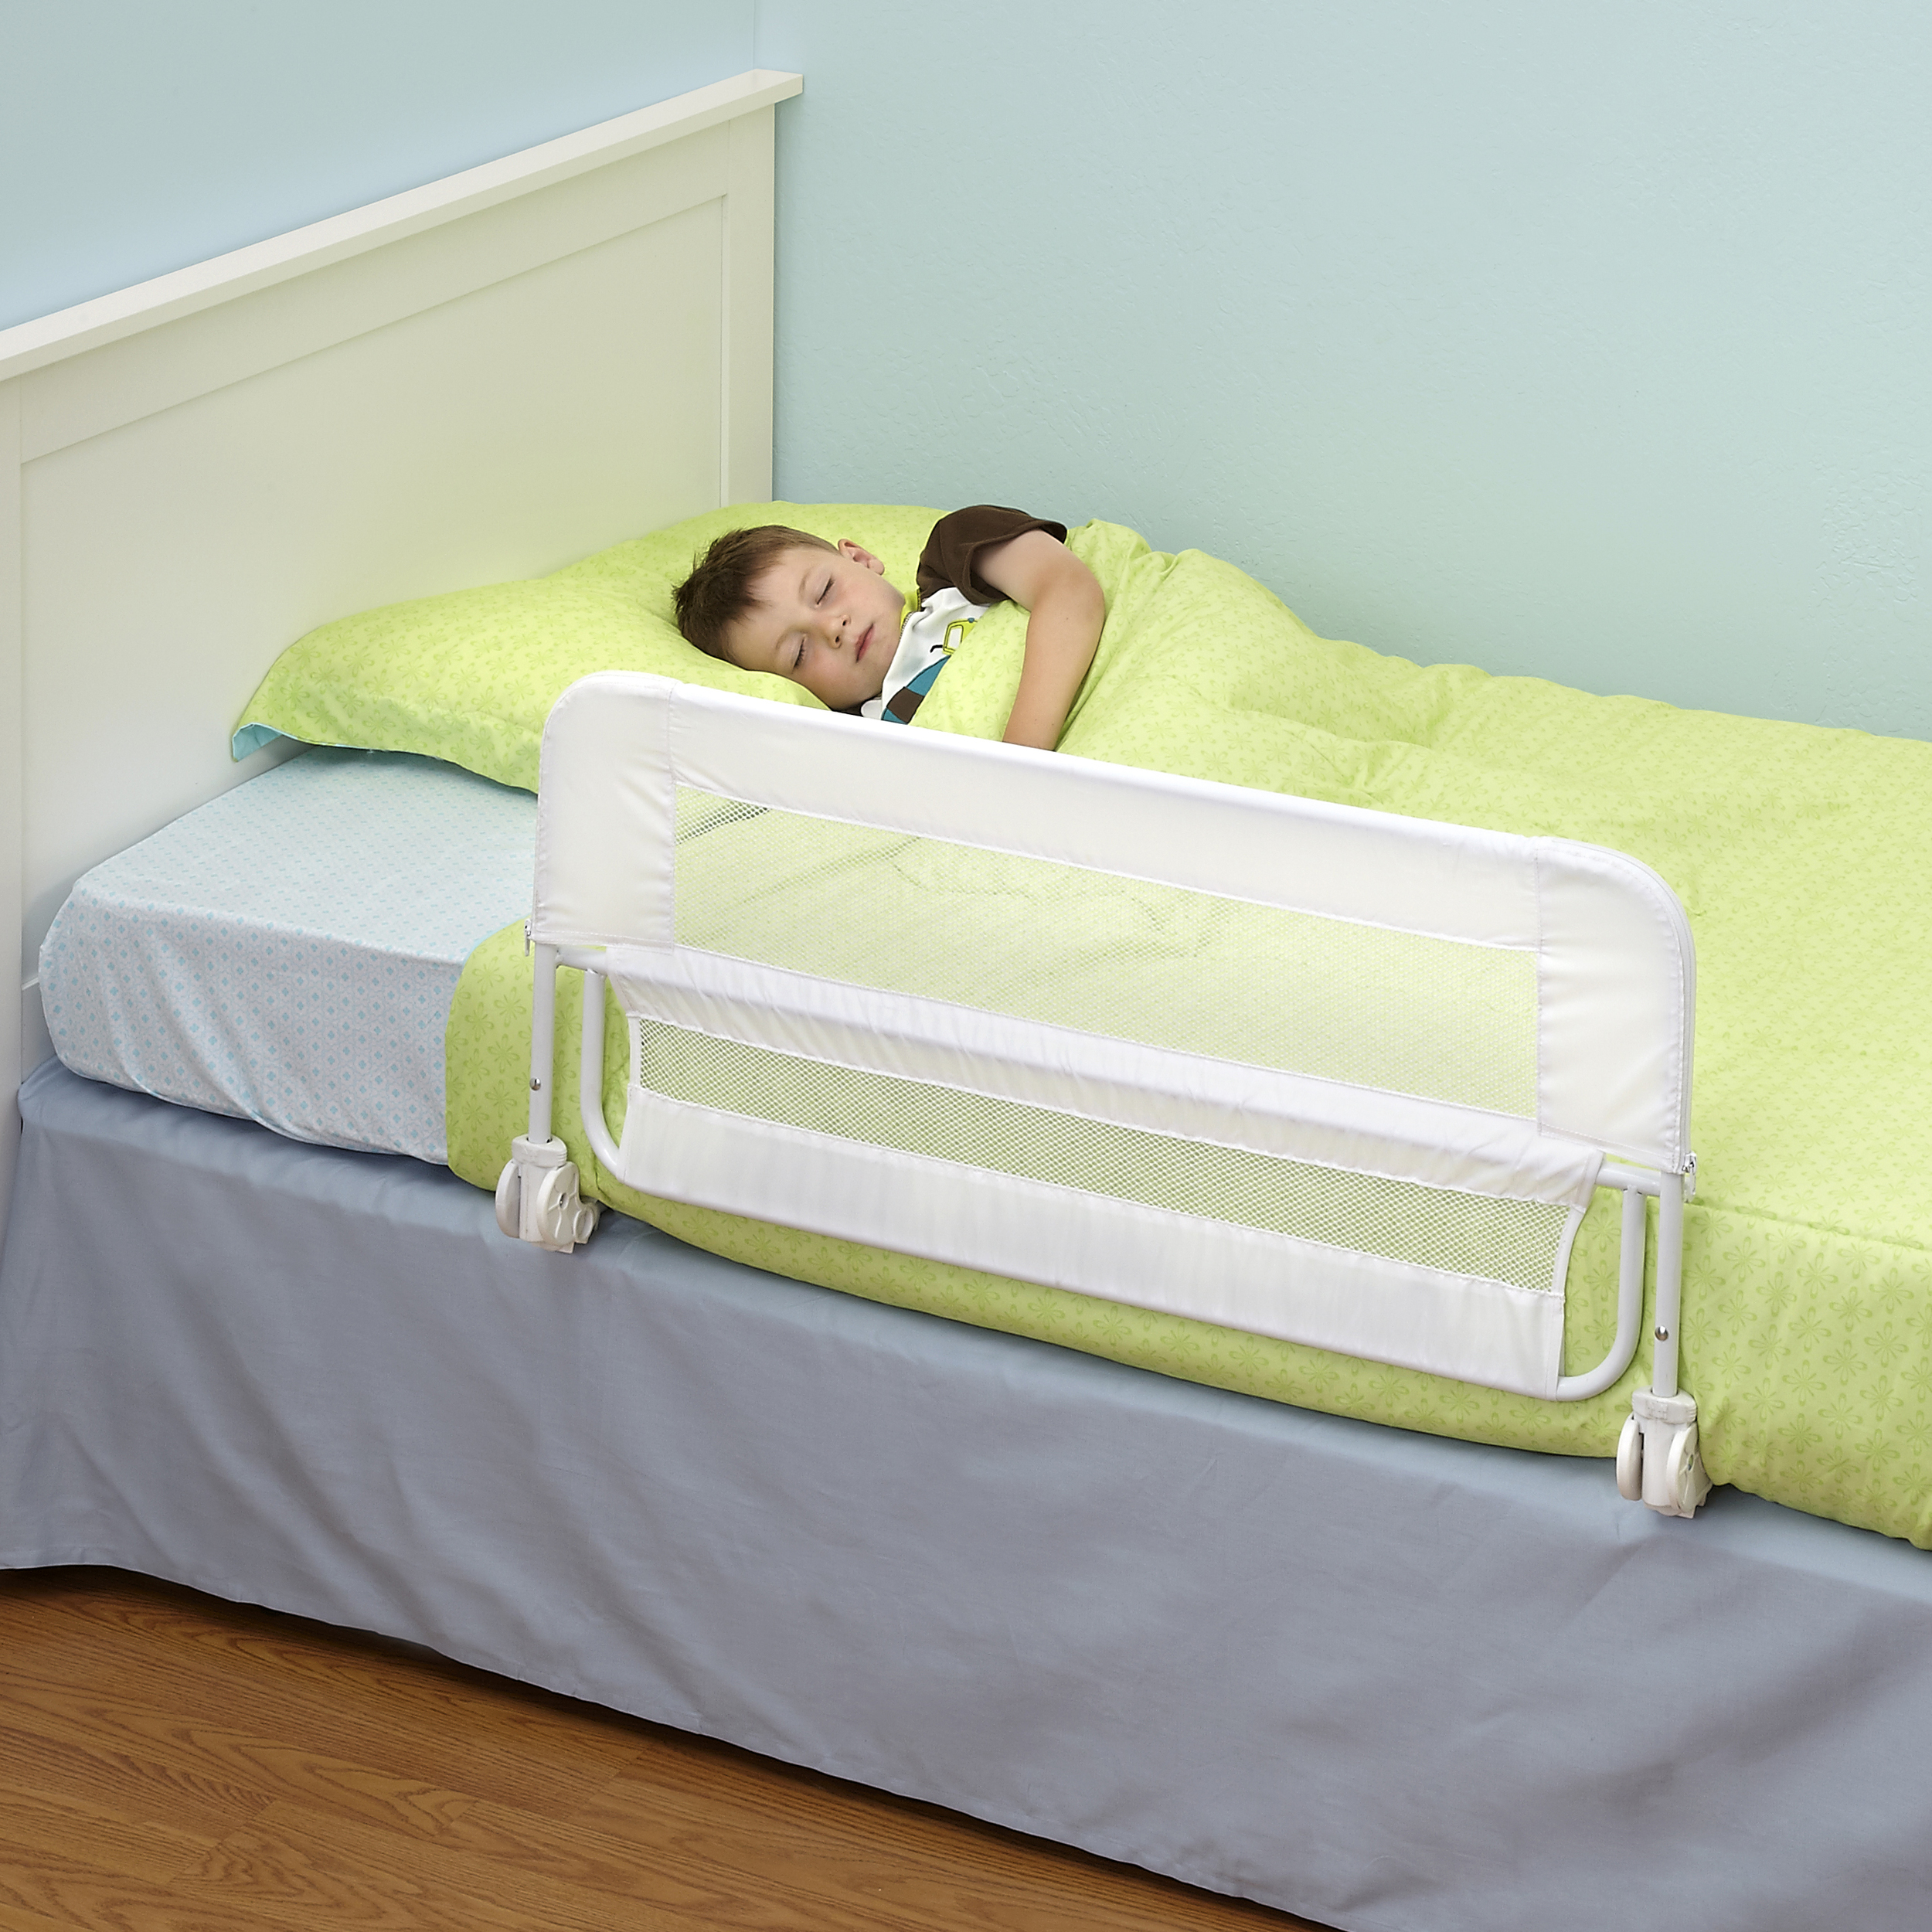 kids couch beds